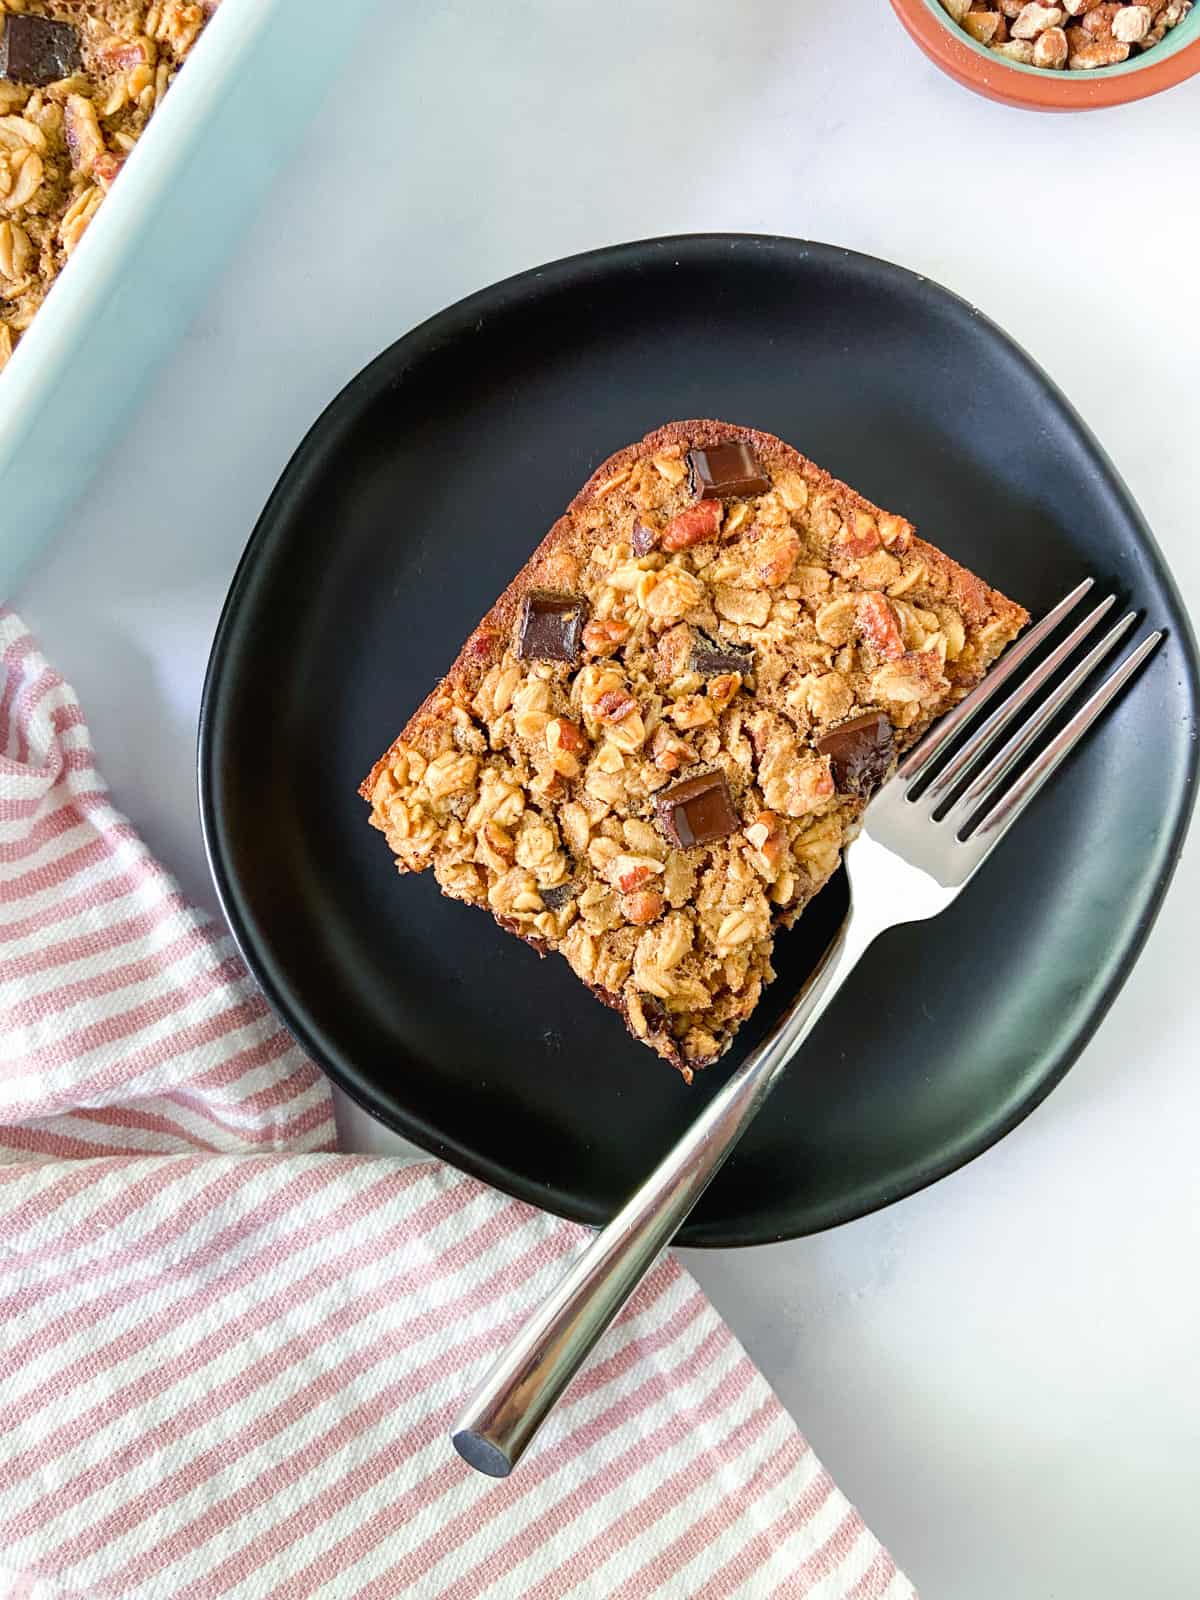 A slice of protein baked oatmeal.